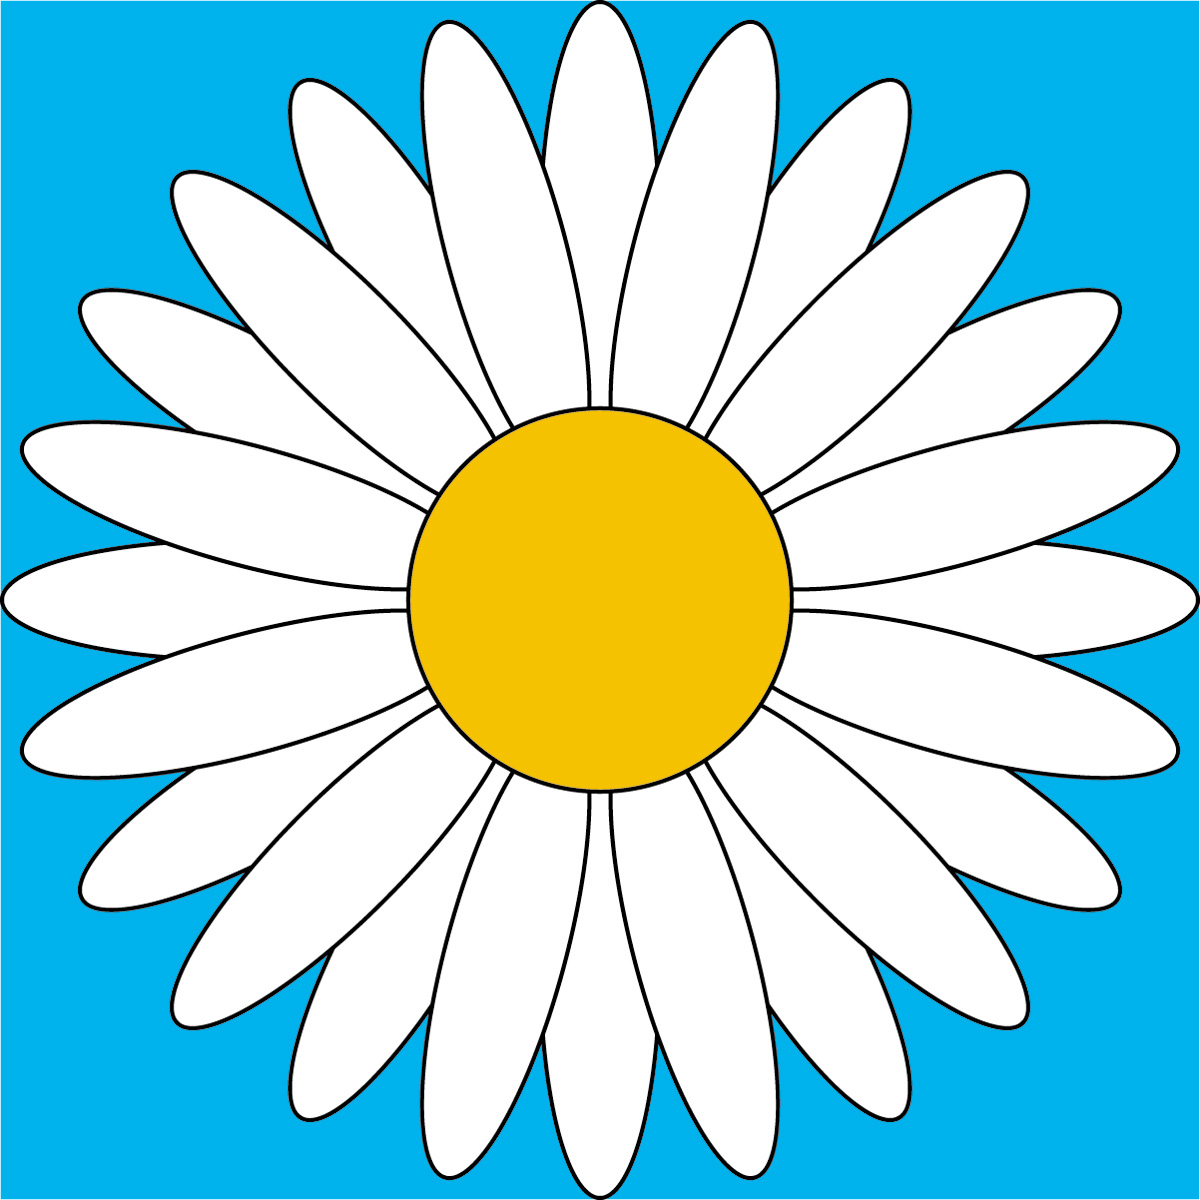 Free daisy clipart public domain flower clip art images and image